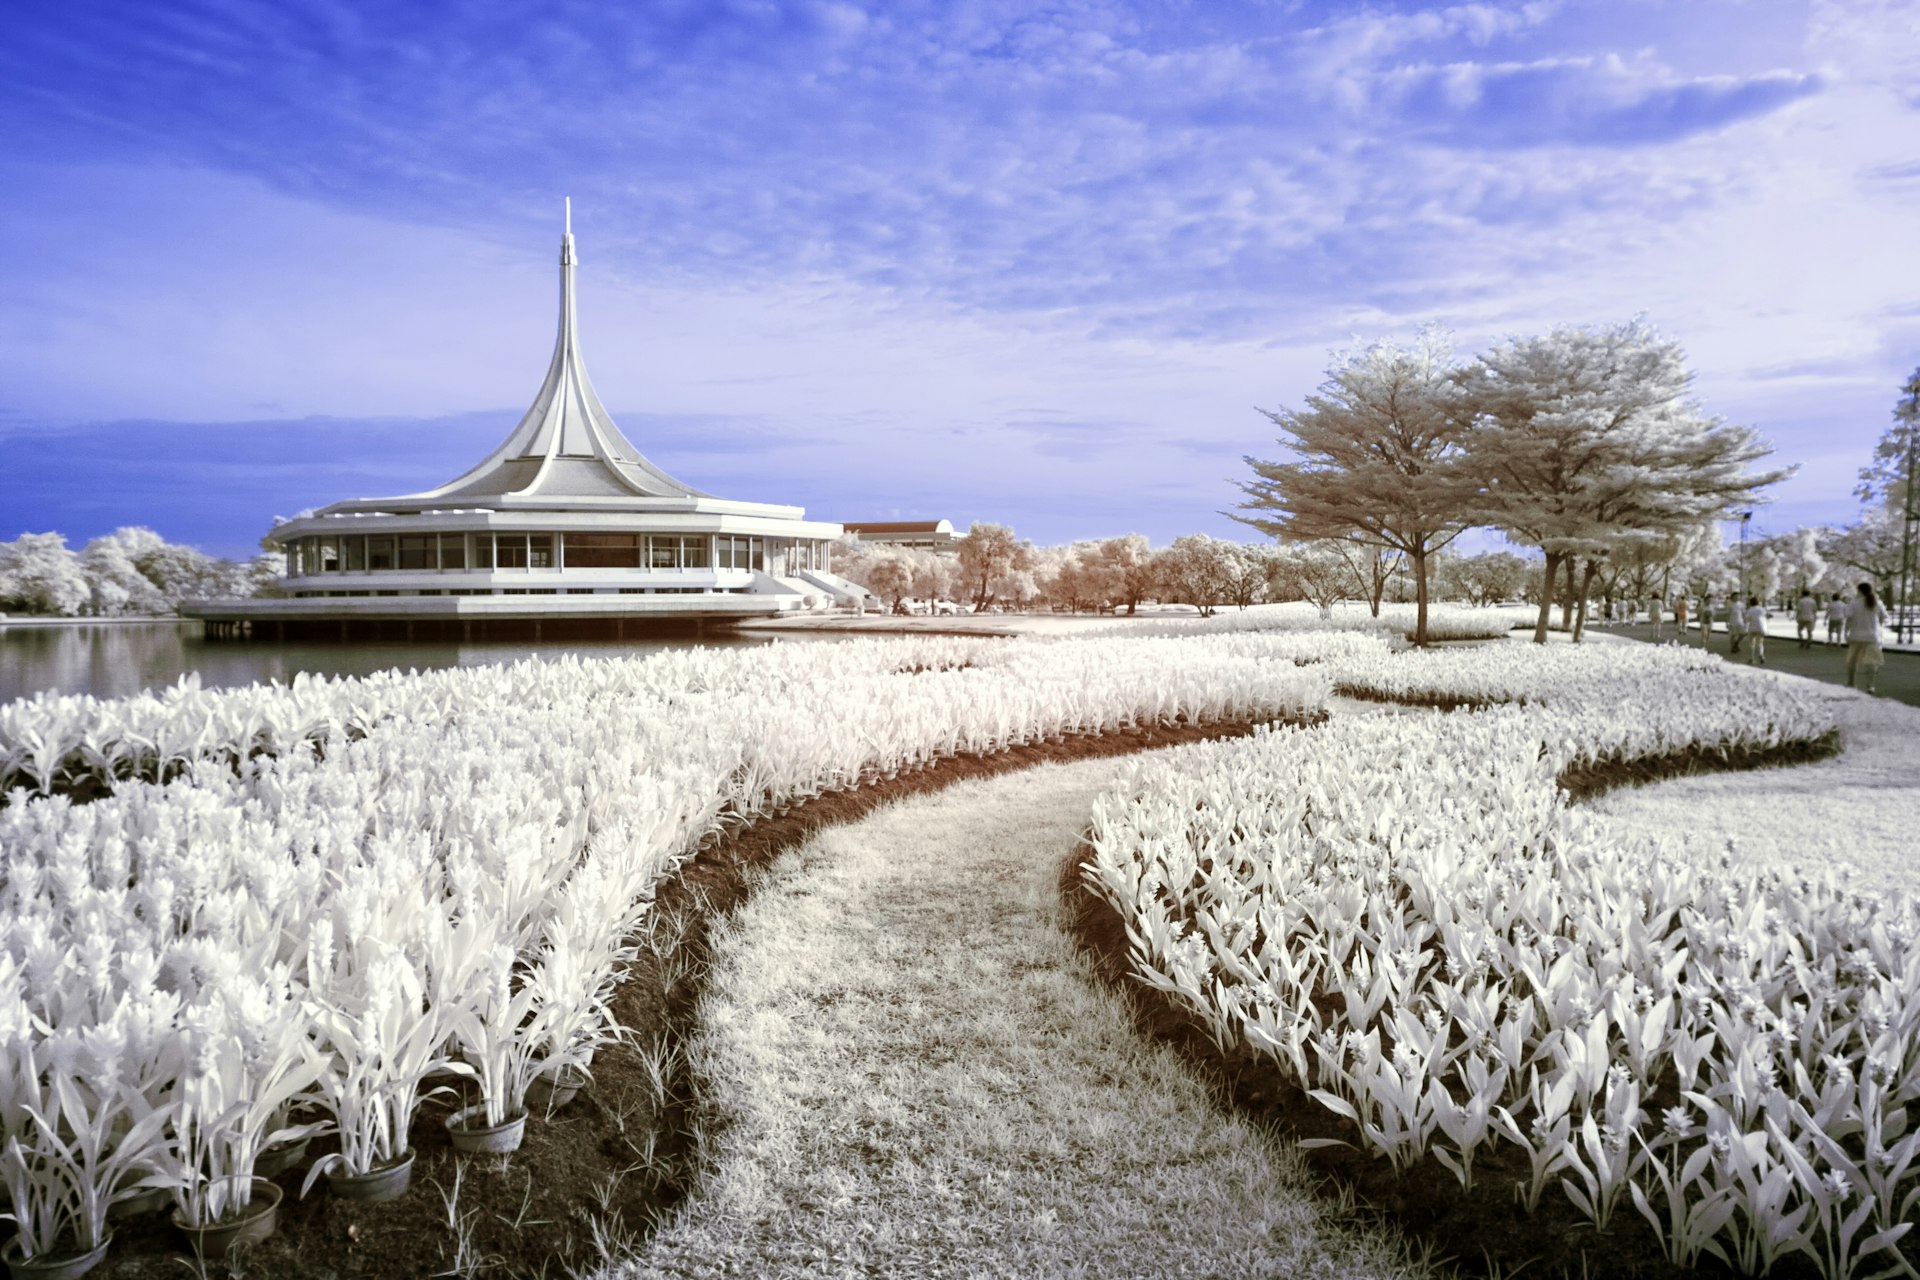 A snow-covered Ratchamangkhala Pavilion in Rama IX National Park just outside of Bangkok, with snow-covered flower beds too.